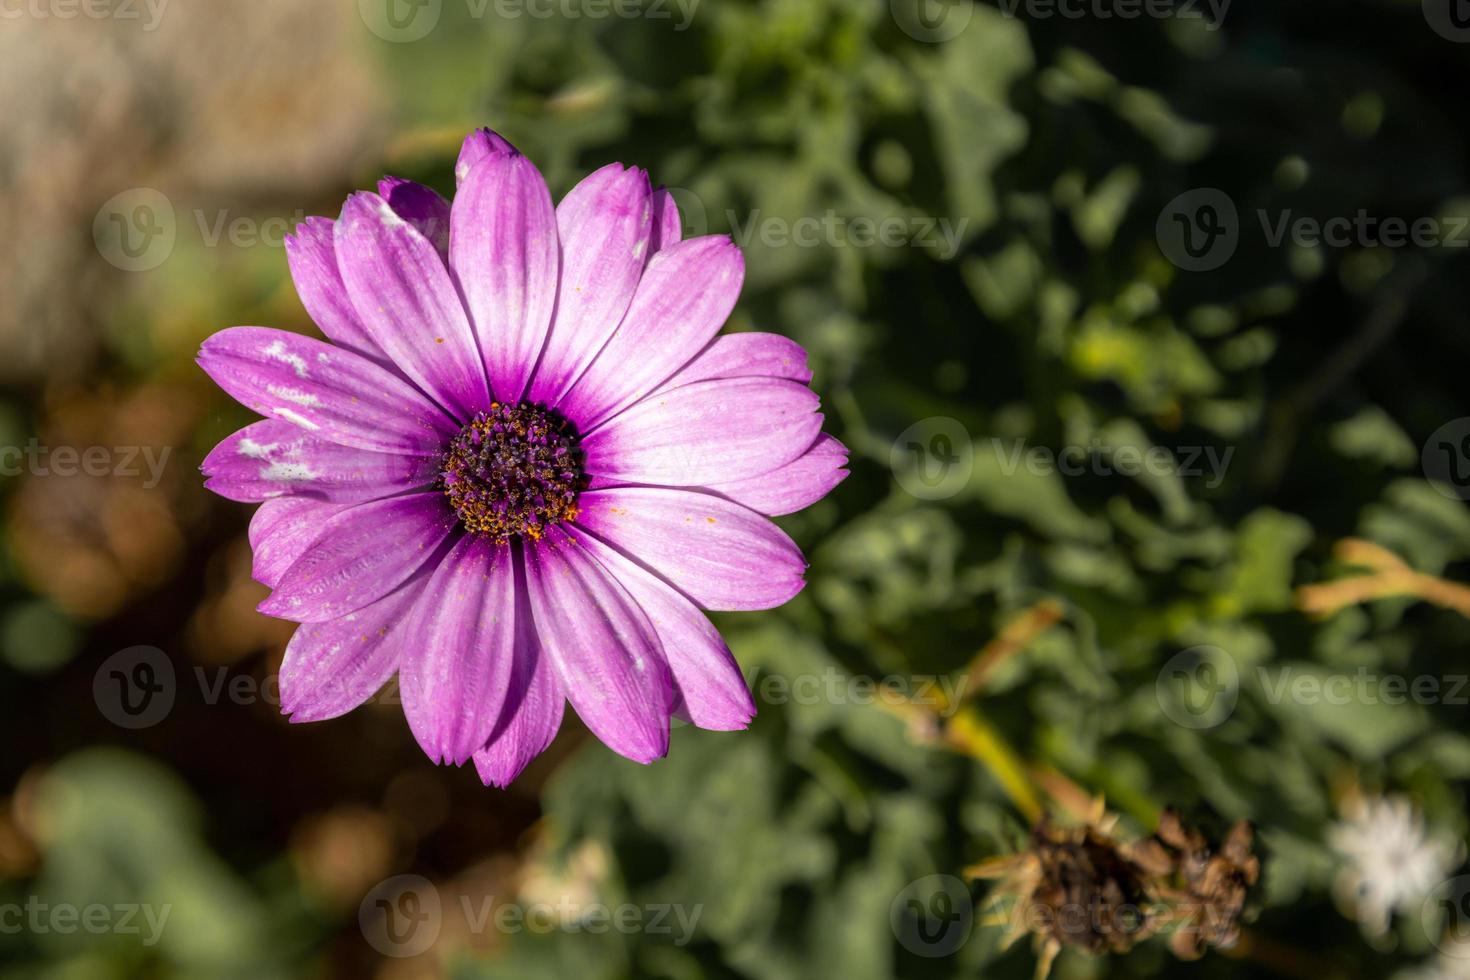 One beautiful pink cosmos flower in the garden photo